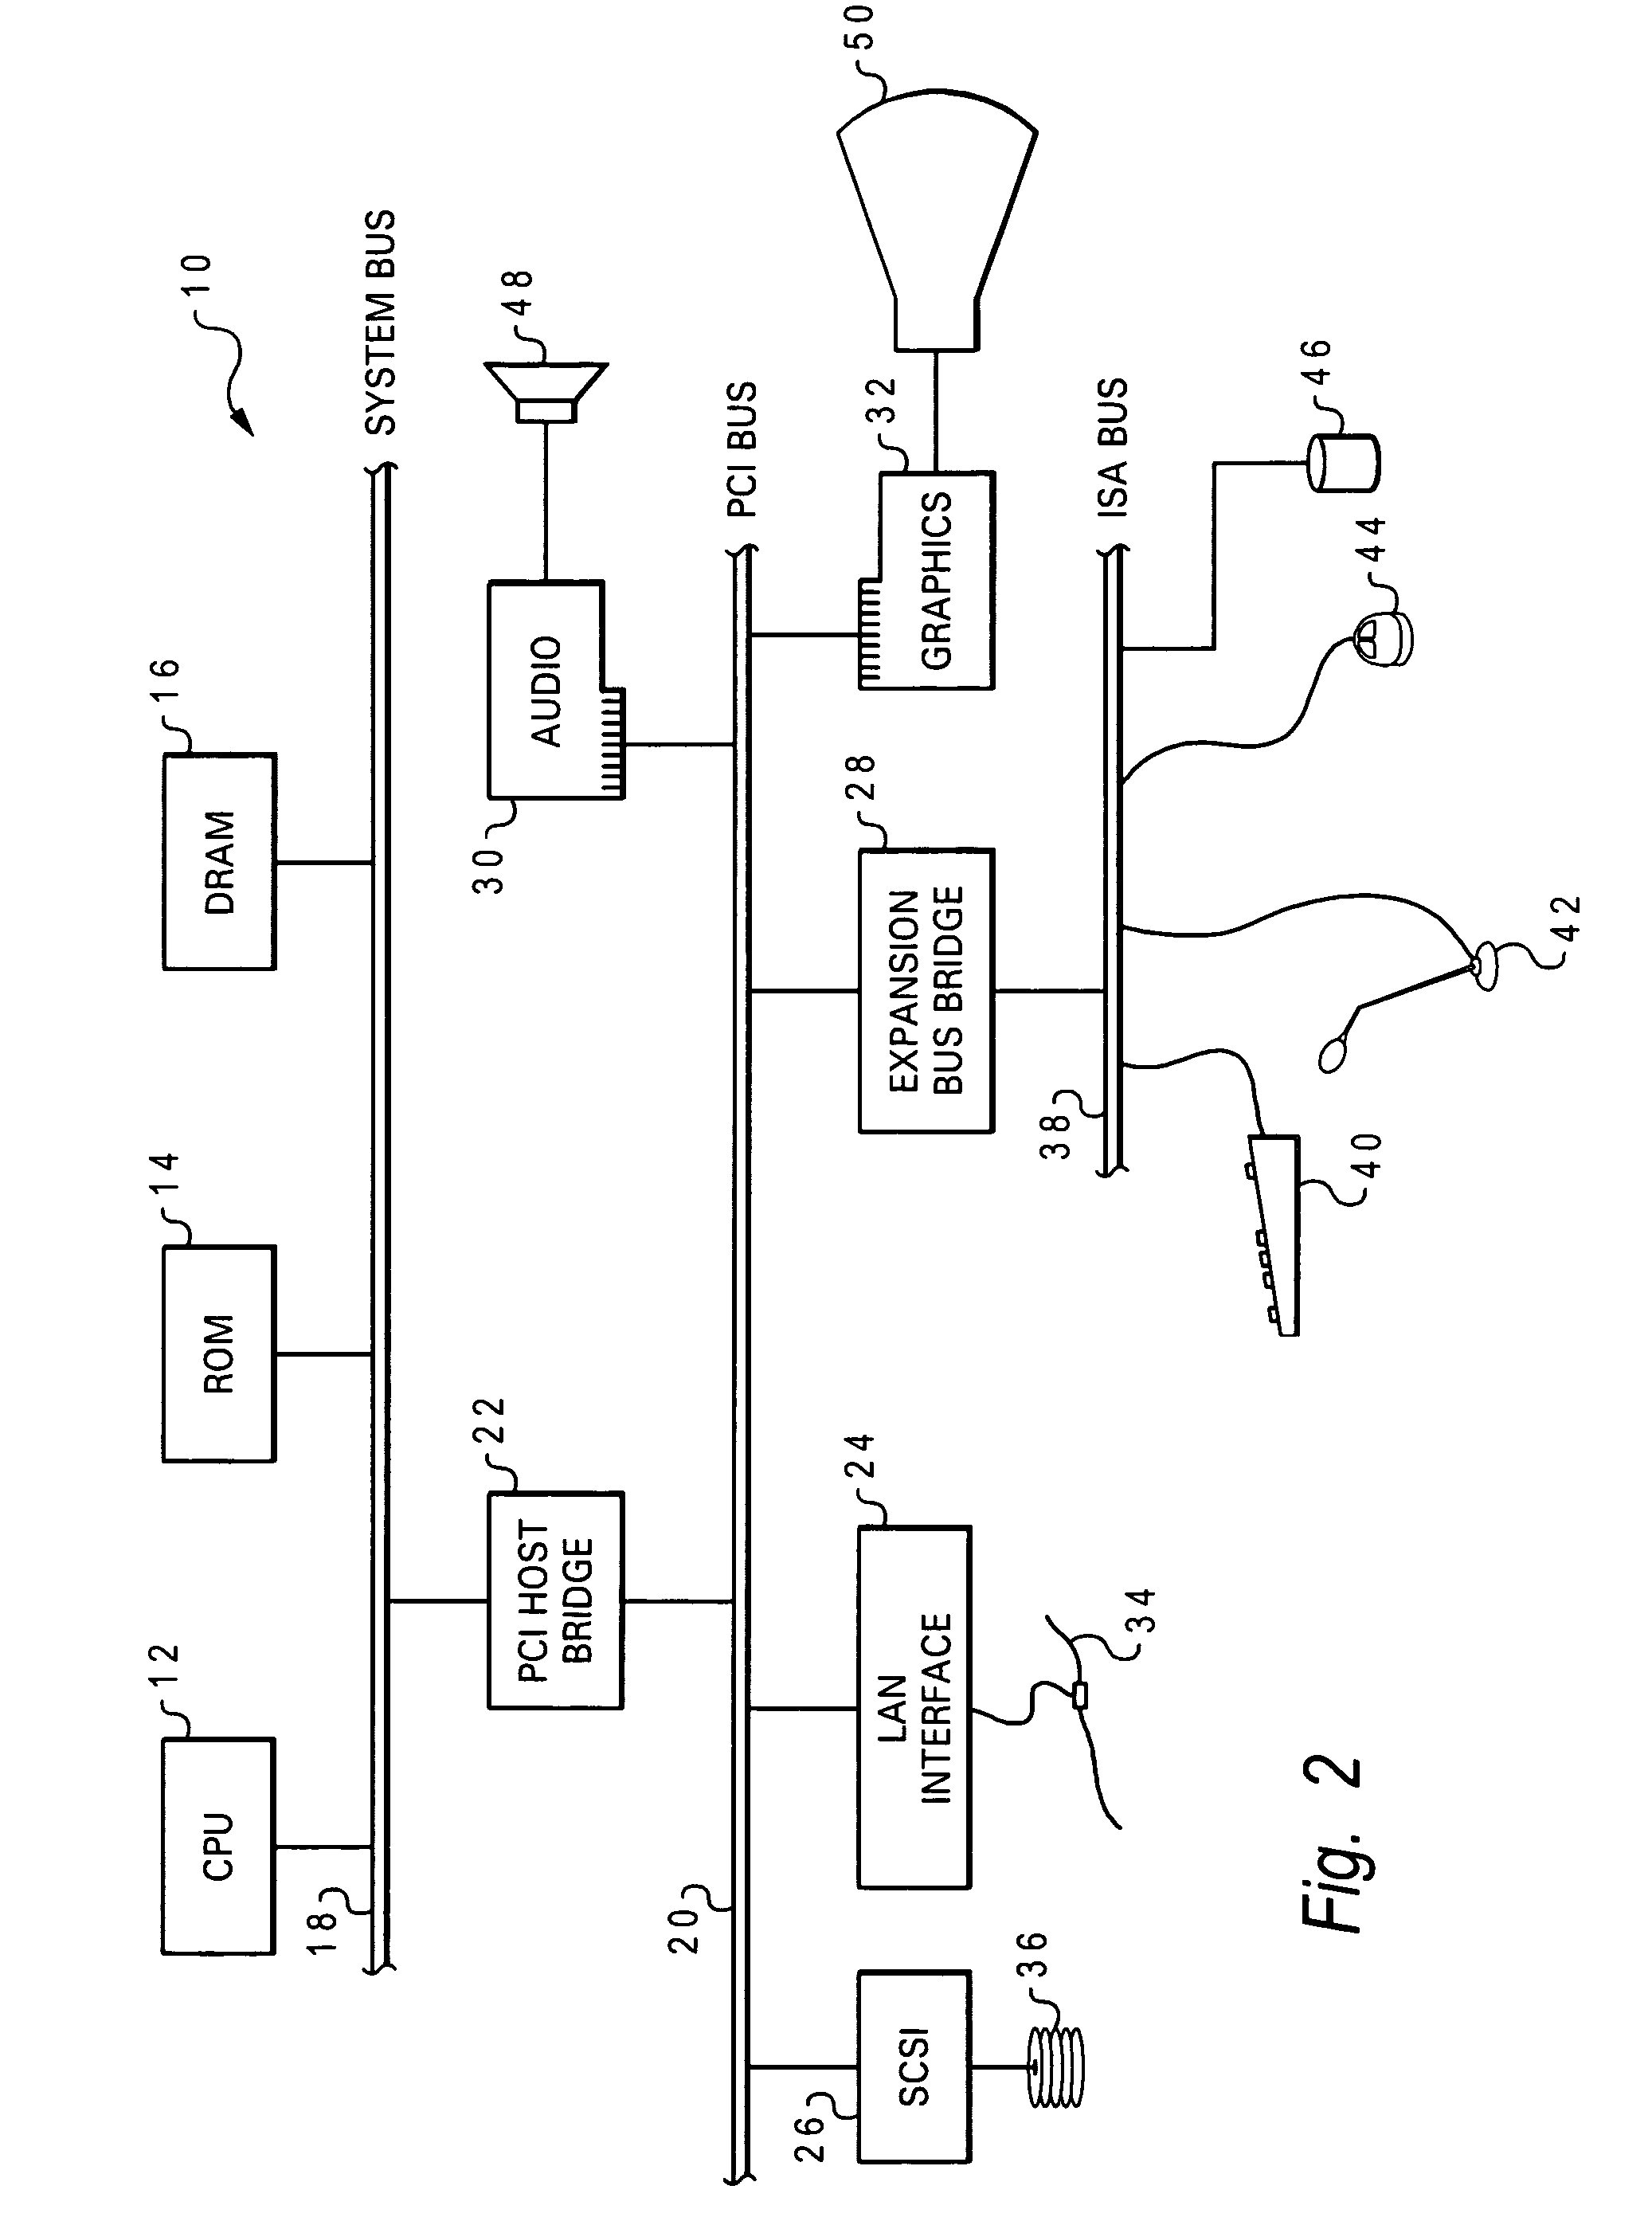 Method of automatically including parenthetical information from set databases while creating a document